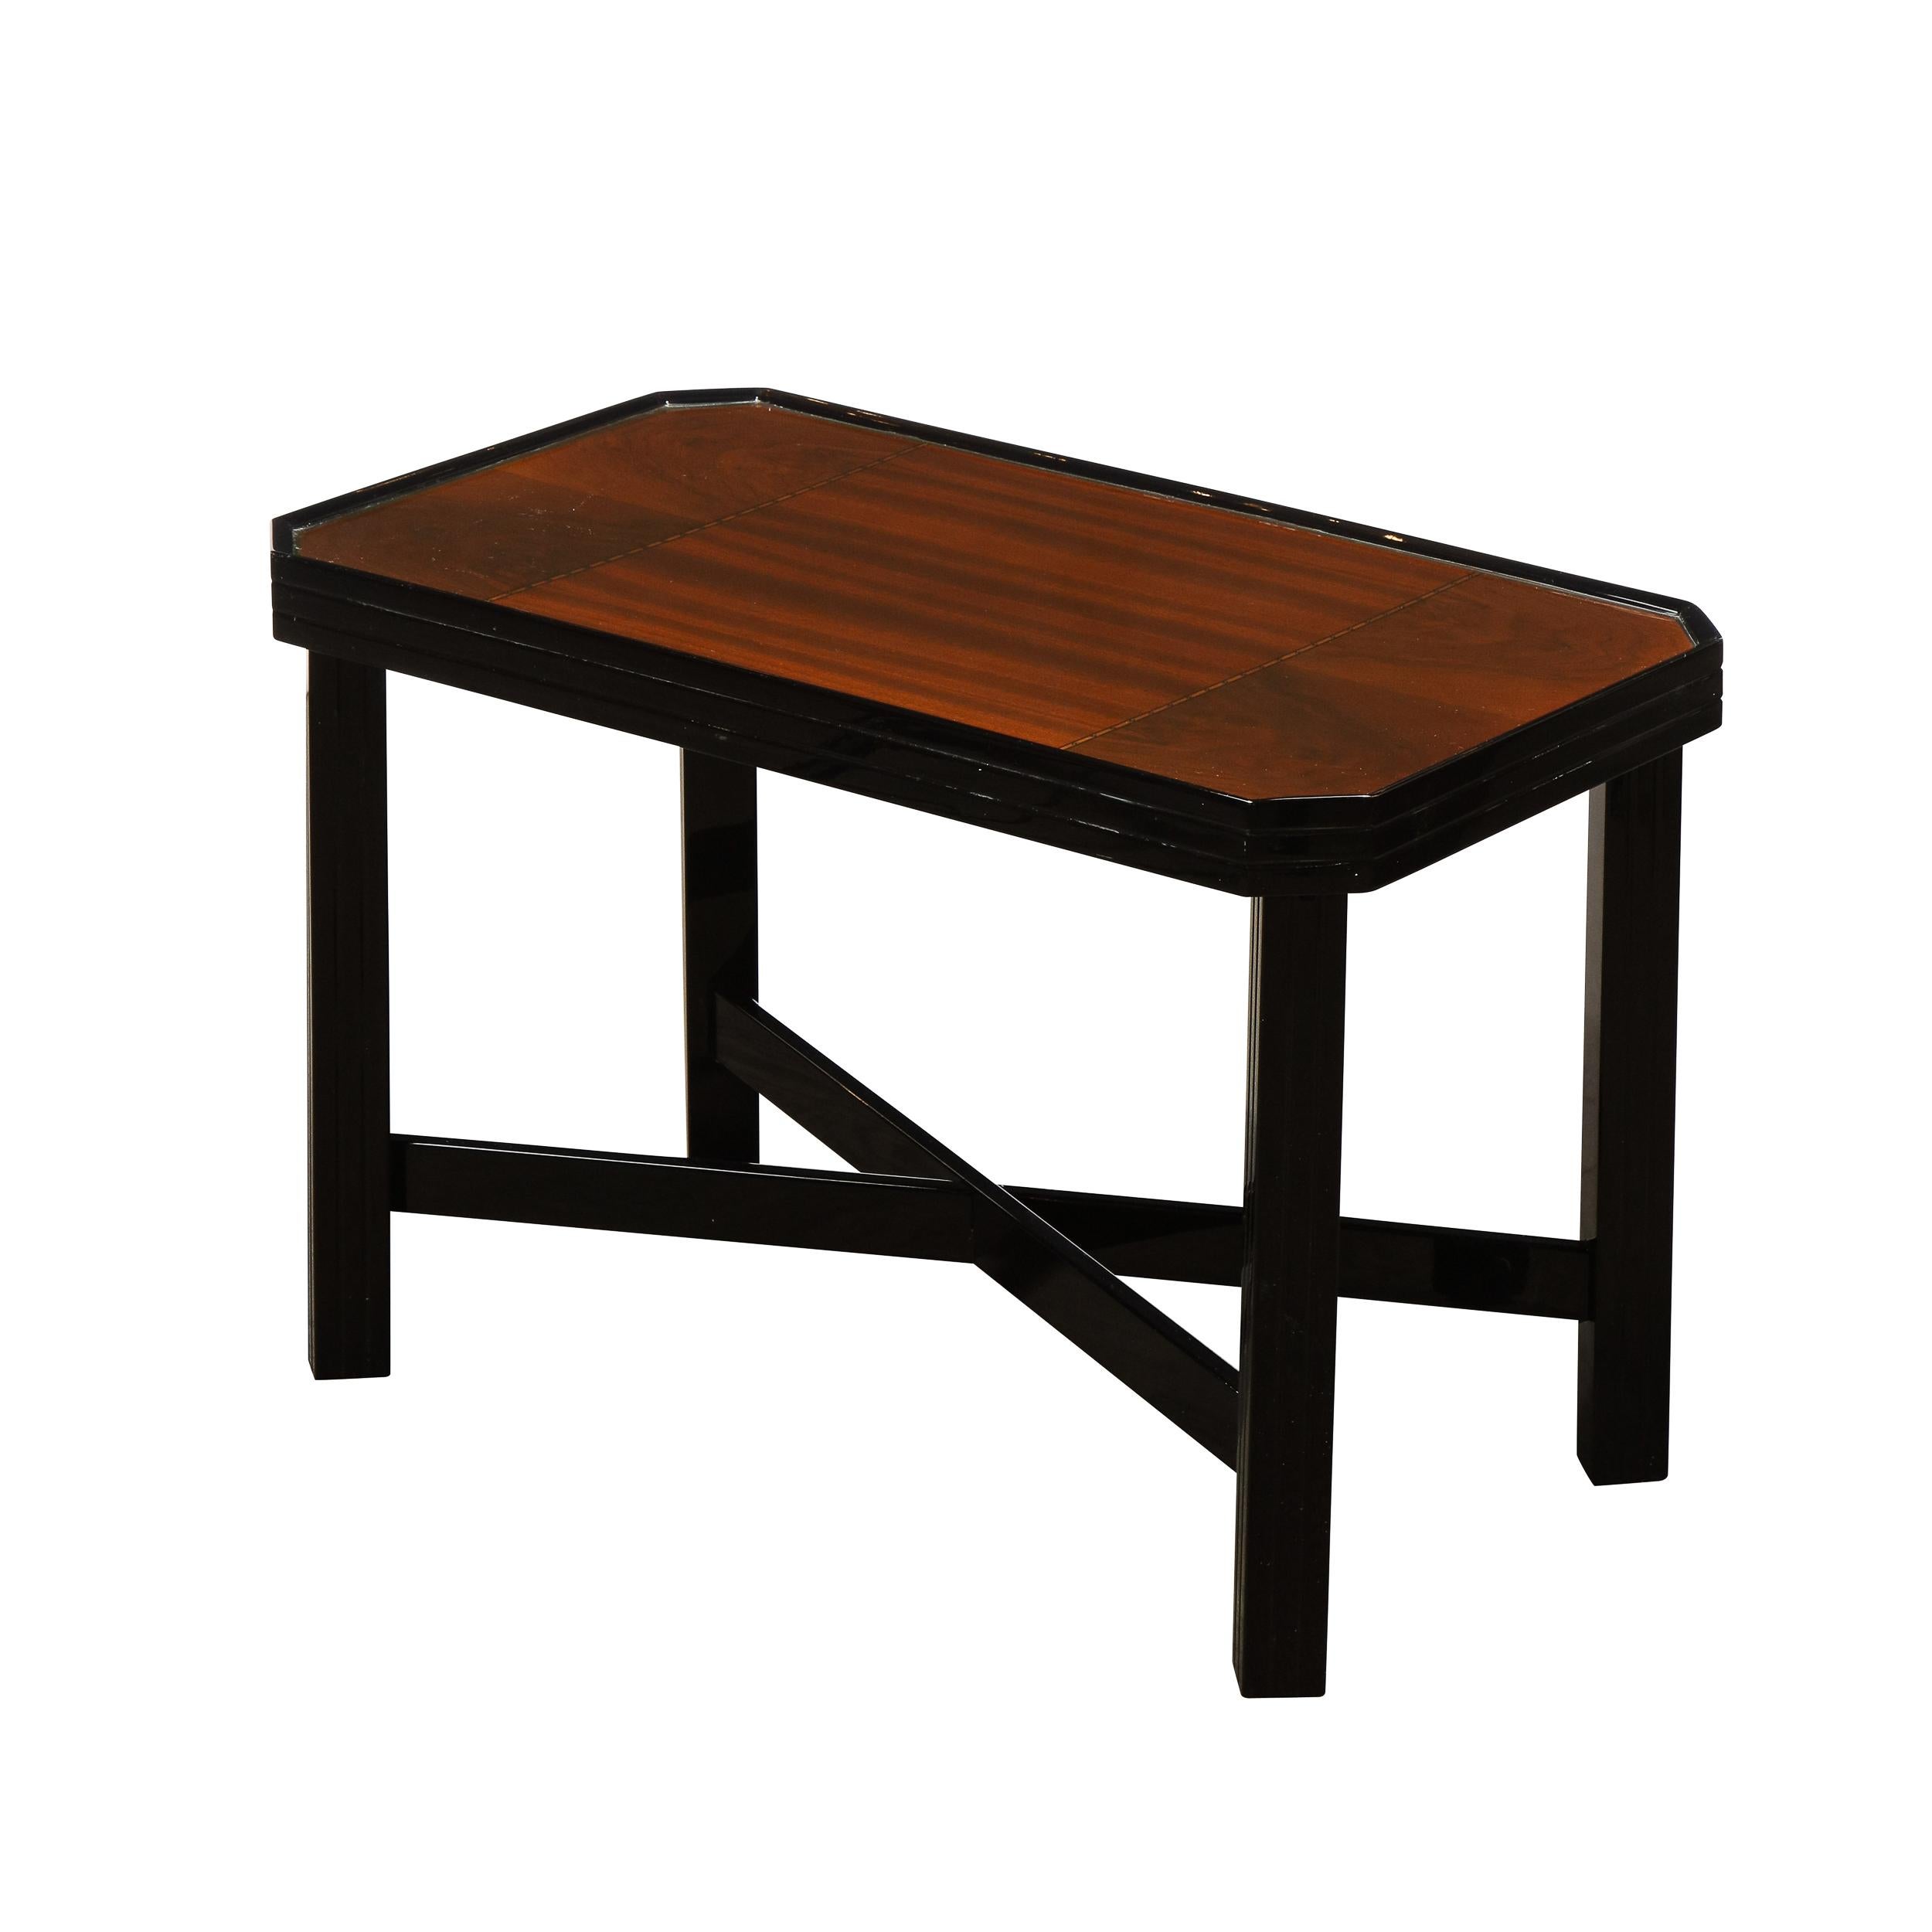 Mid-20th Century Art Deco Machine Age Black Lacquer Burled & Bookmatched Walnut Side Table For Sale